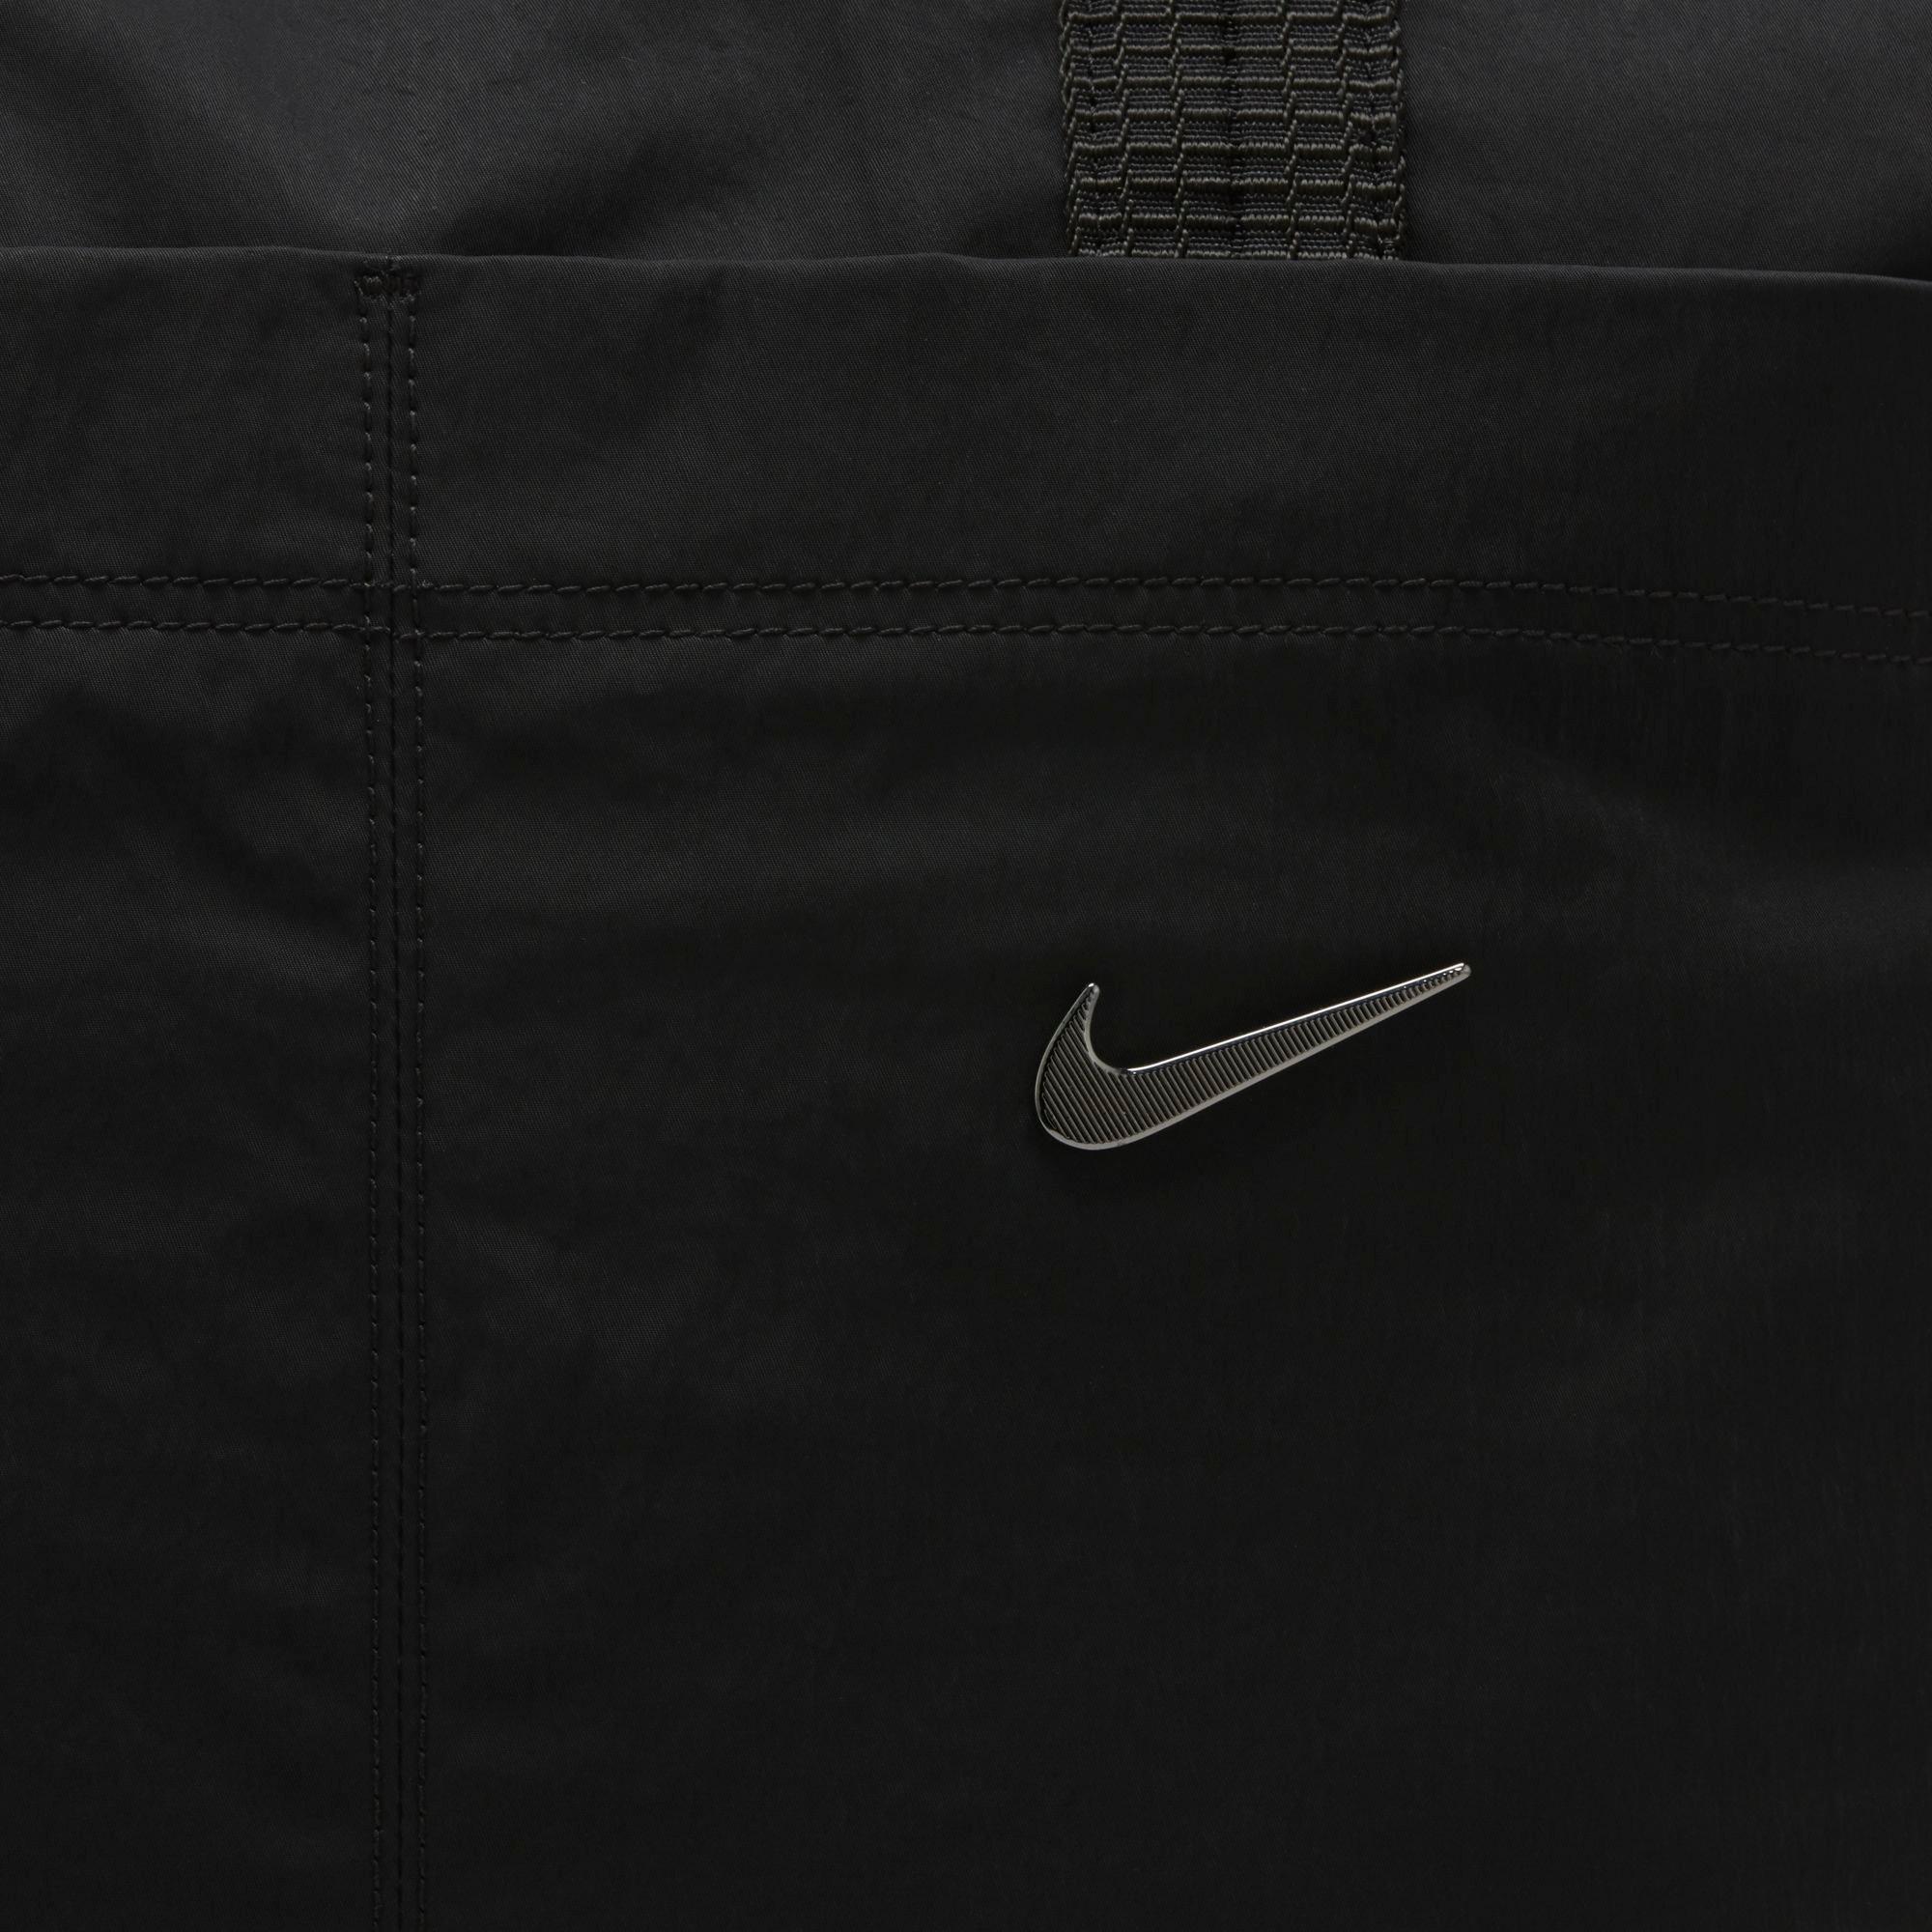 nike one luxe bag